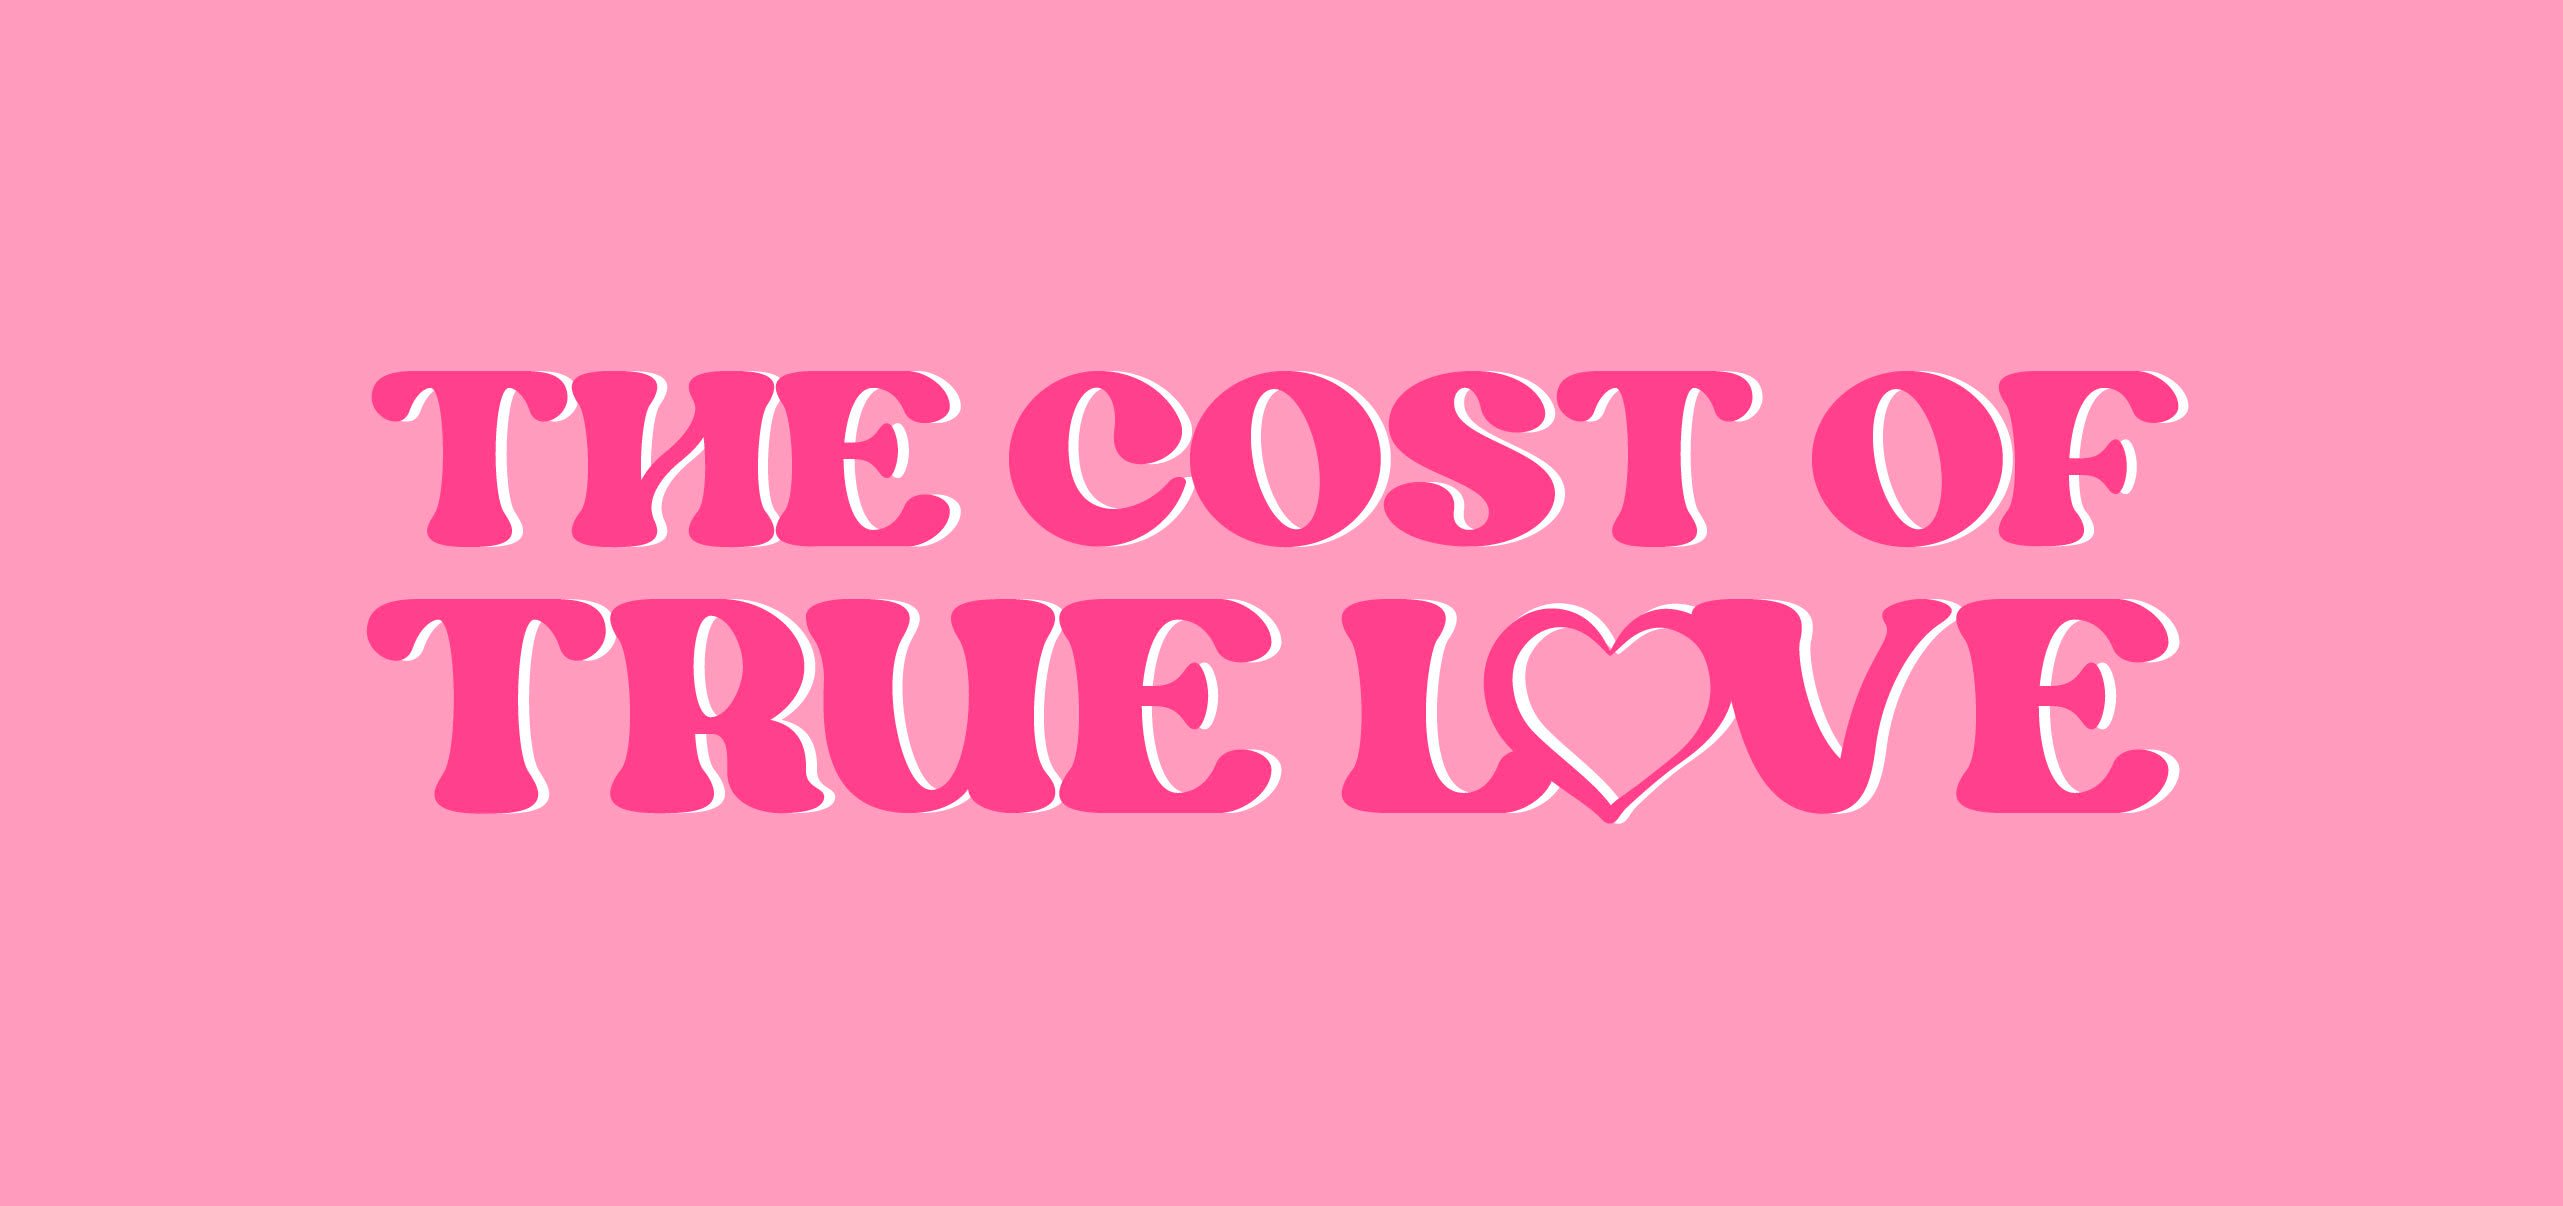 The true cost of love